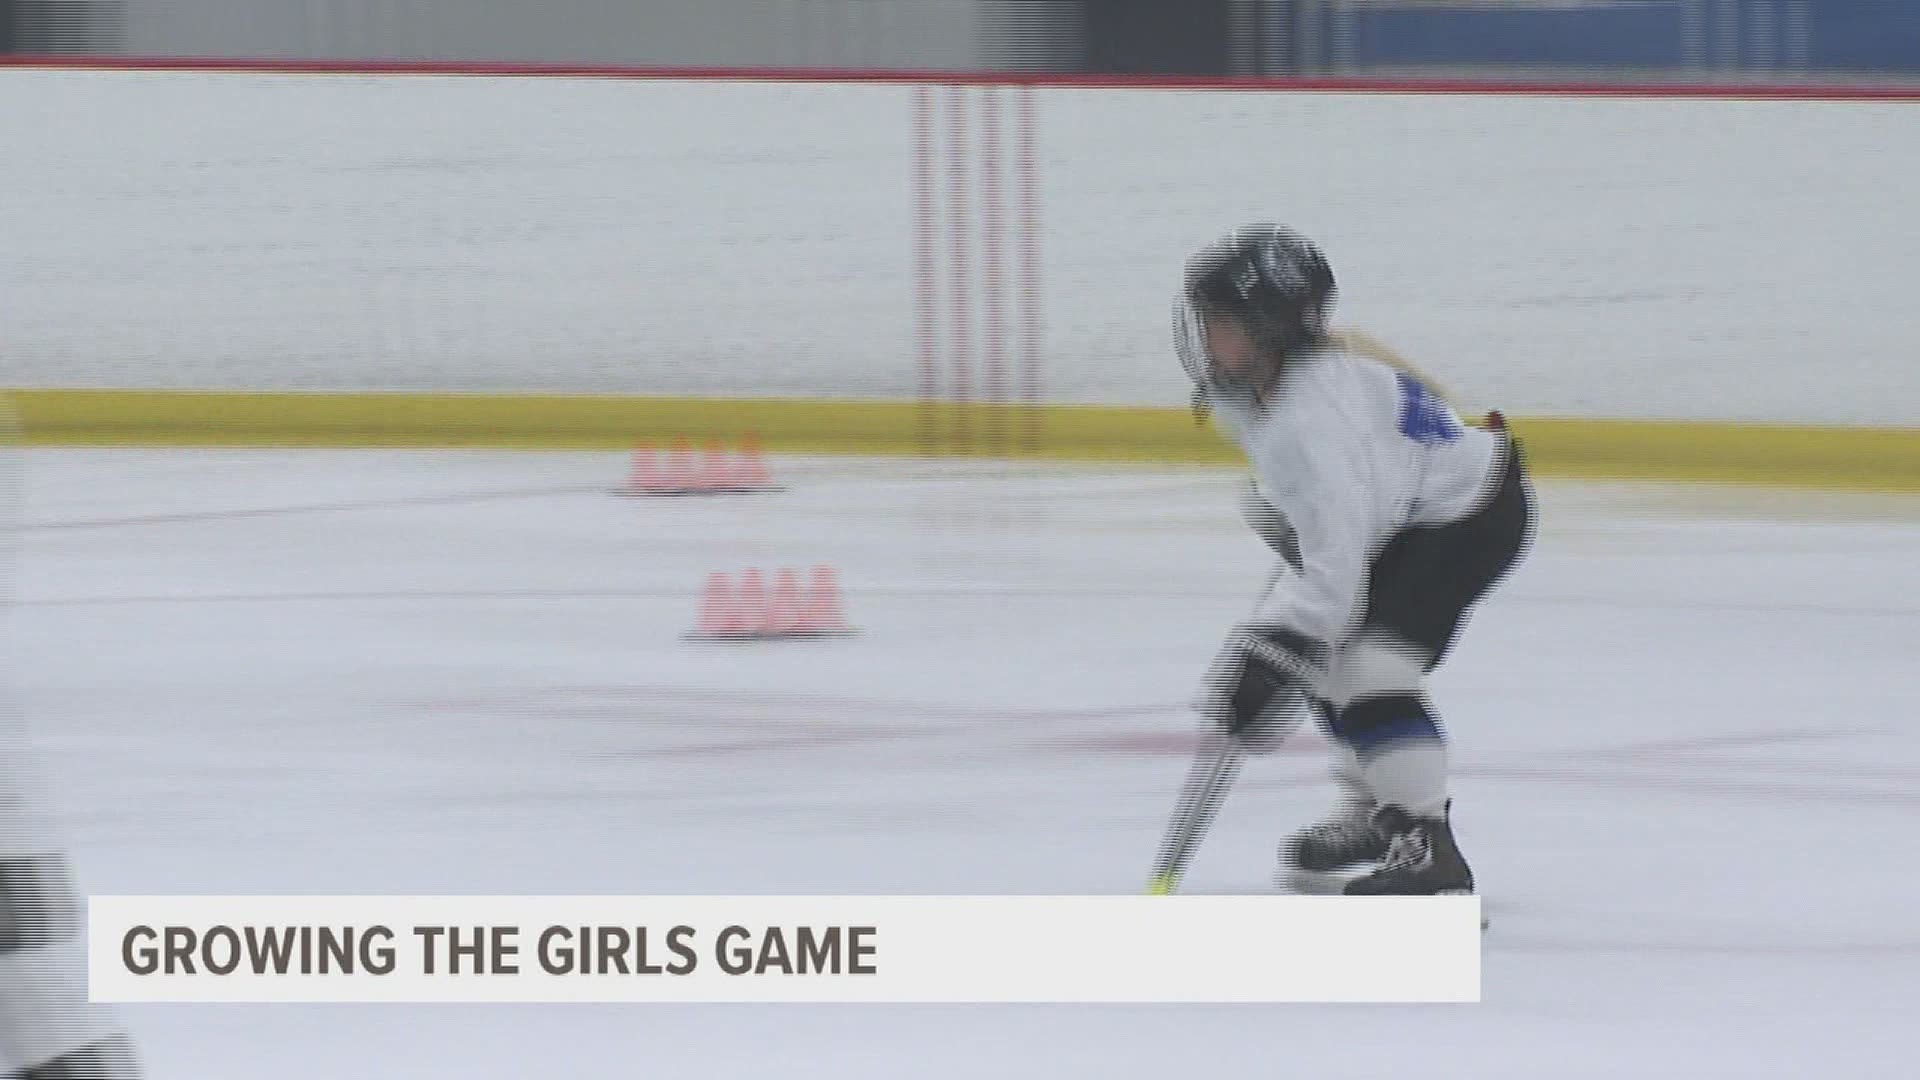 A few years ago, just 17 girls were playing girls hockey down at the River's Edge. Now they're up to 50.